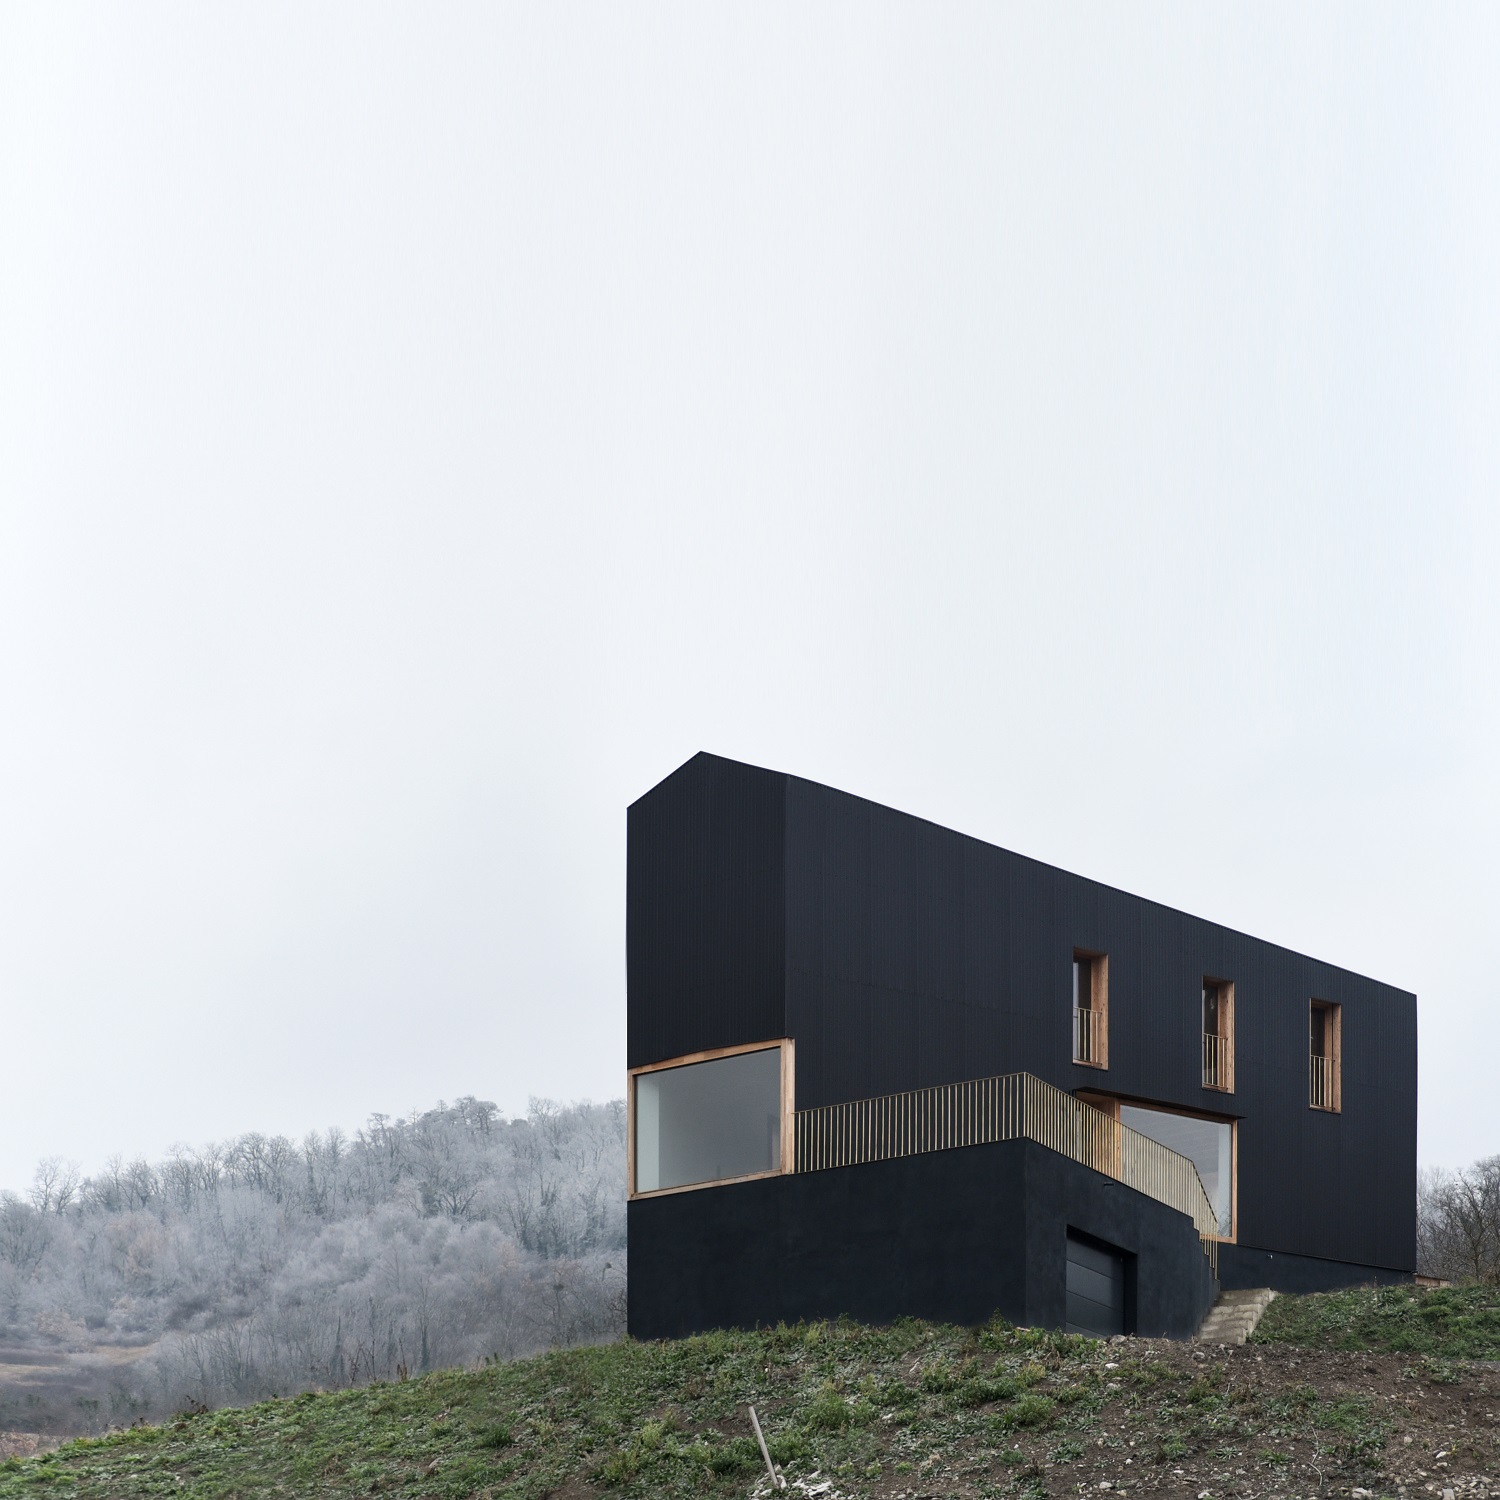 Detached House by Récita Architecture stands on the edge of the slopes of Puy-de-Mur, a distance from the surrounding rural environment